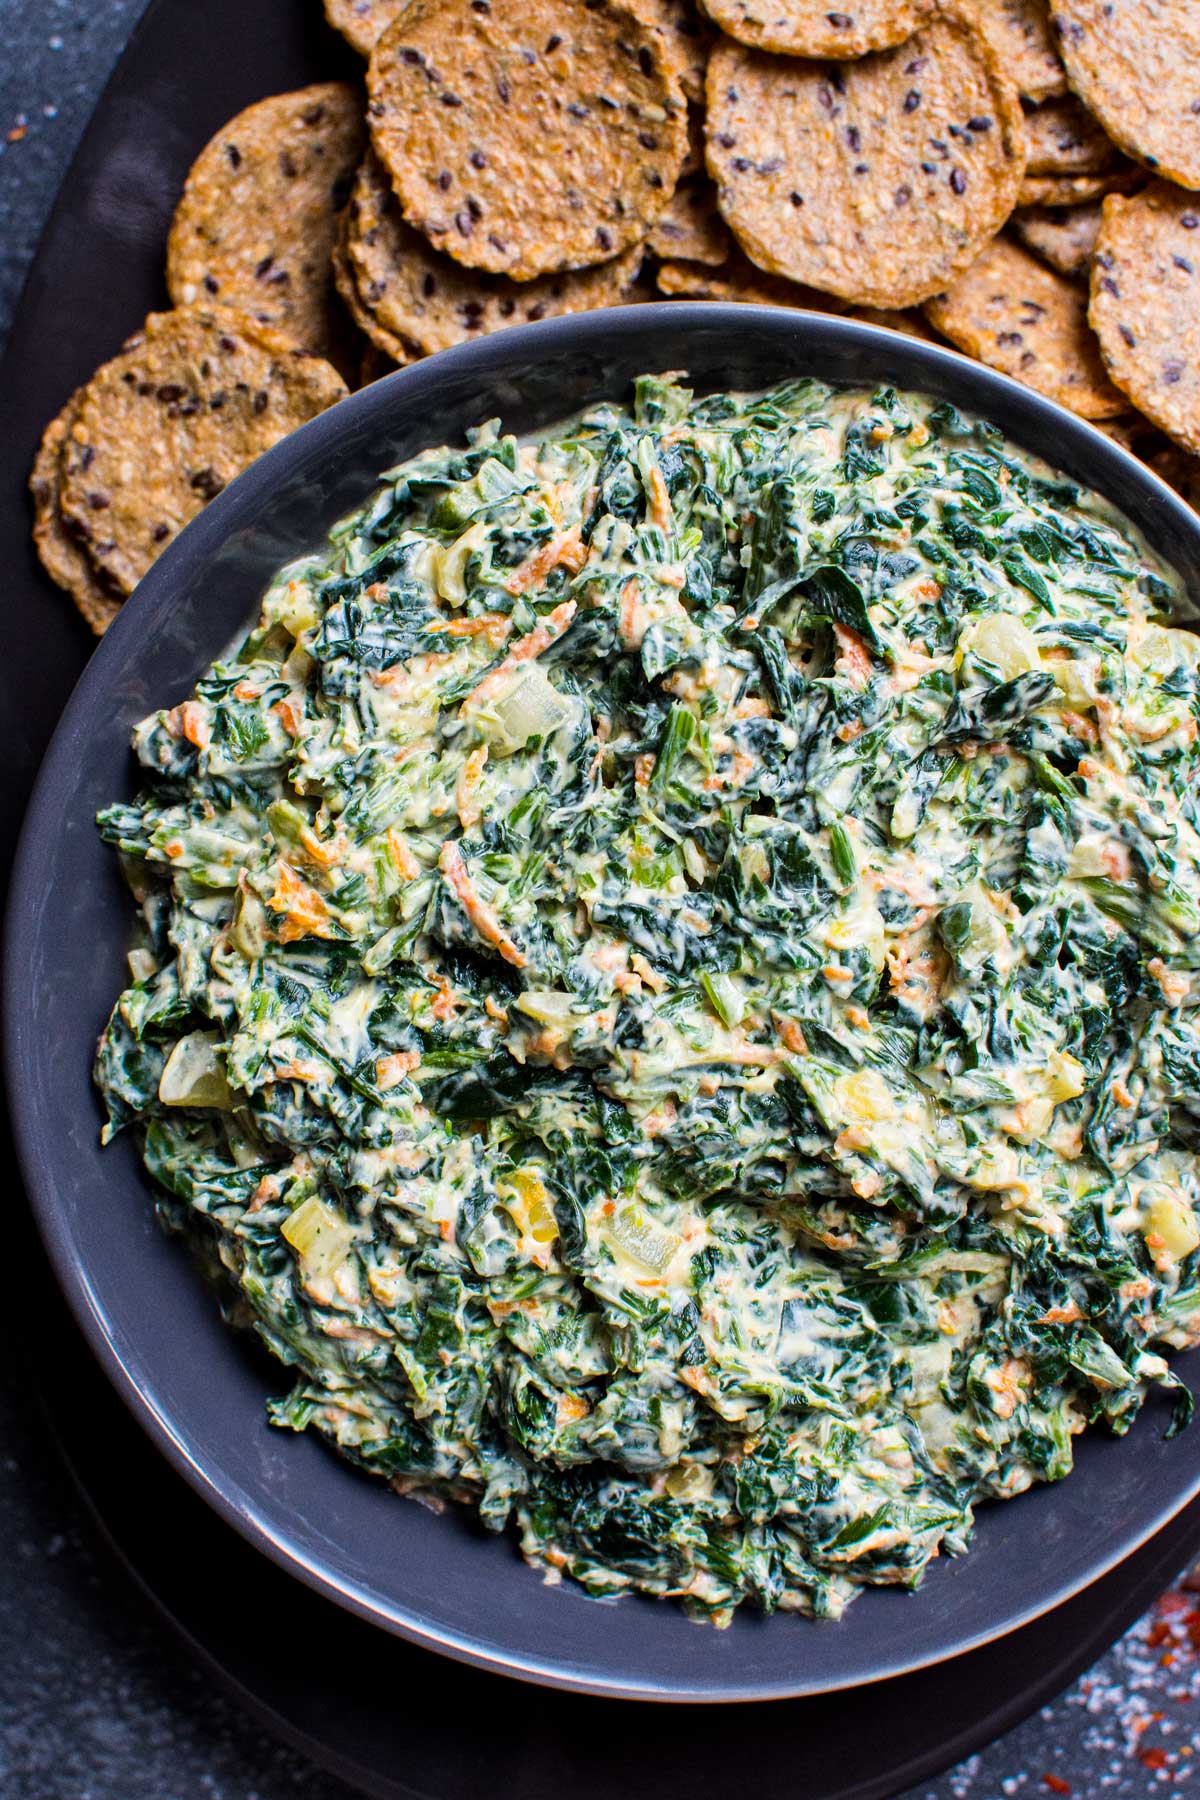 cold spinach dip recipe in. bowl with crackers